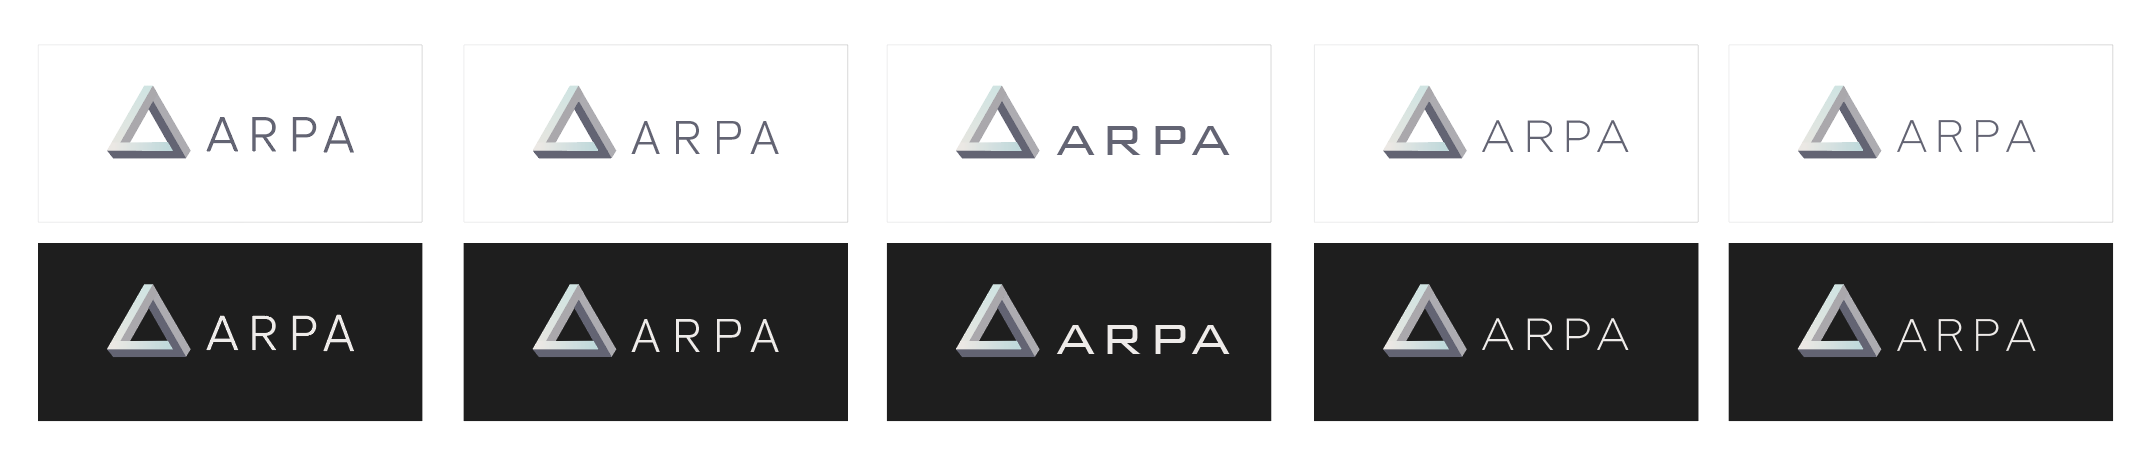 arpa-typeface-explorations